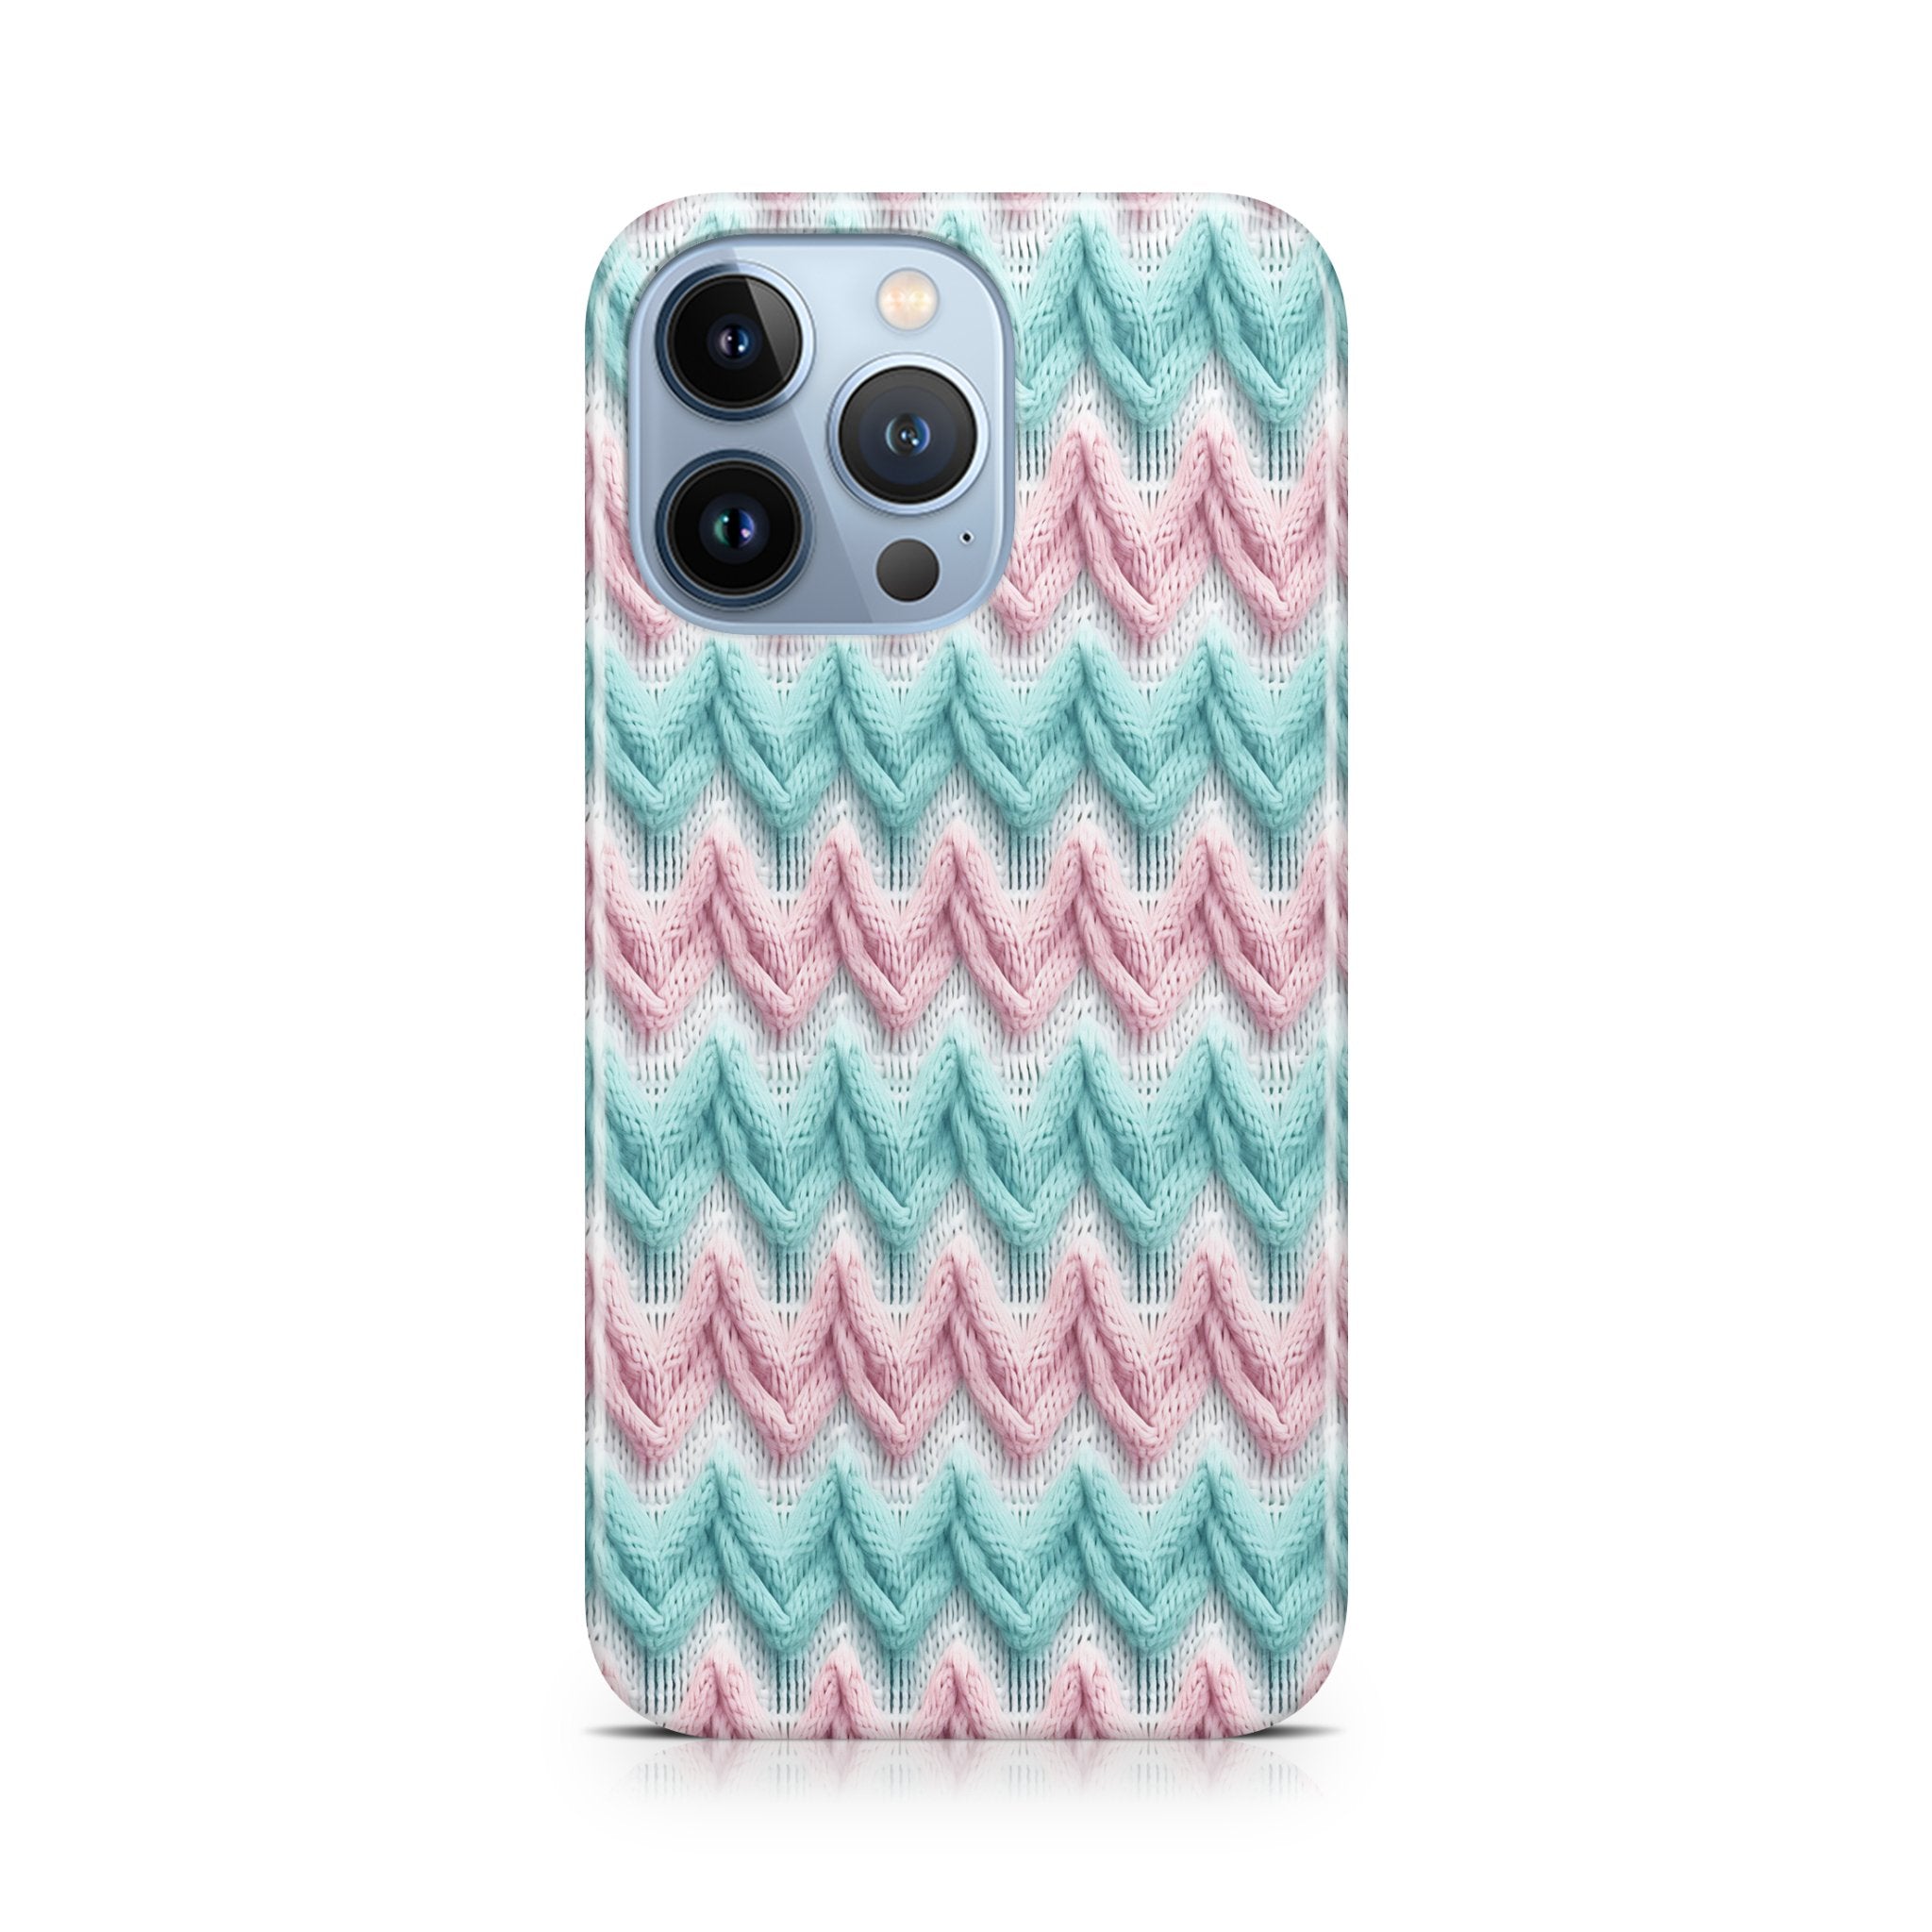 Dreamy Hues - iPhone phone case designs by CaseSwagger